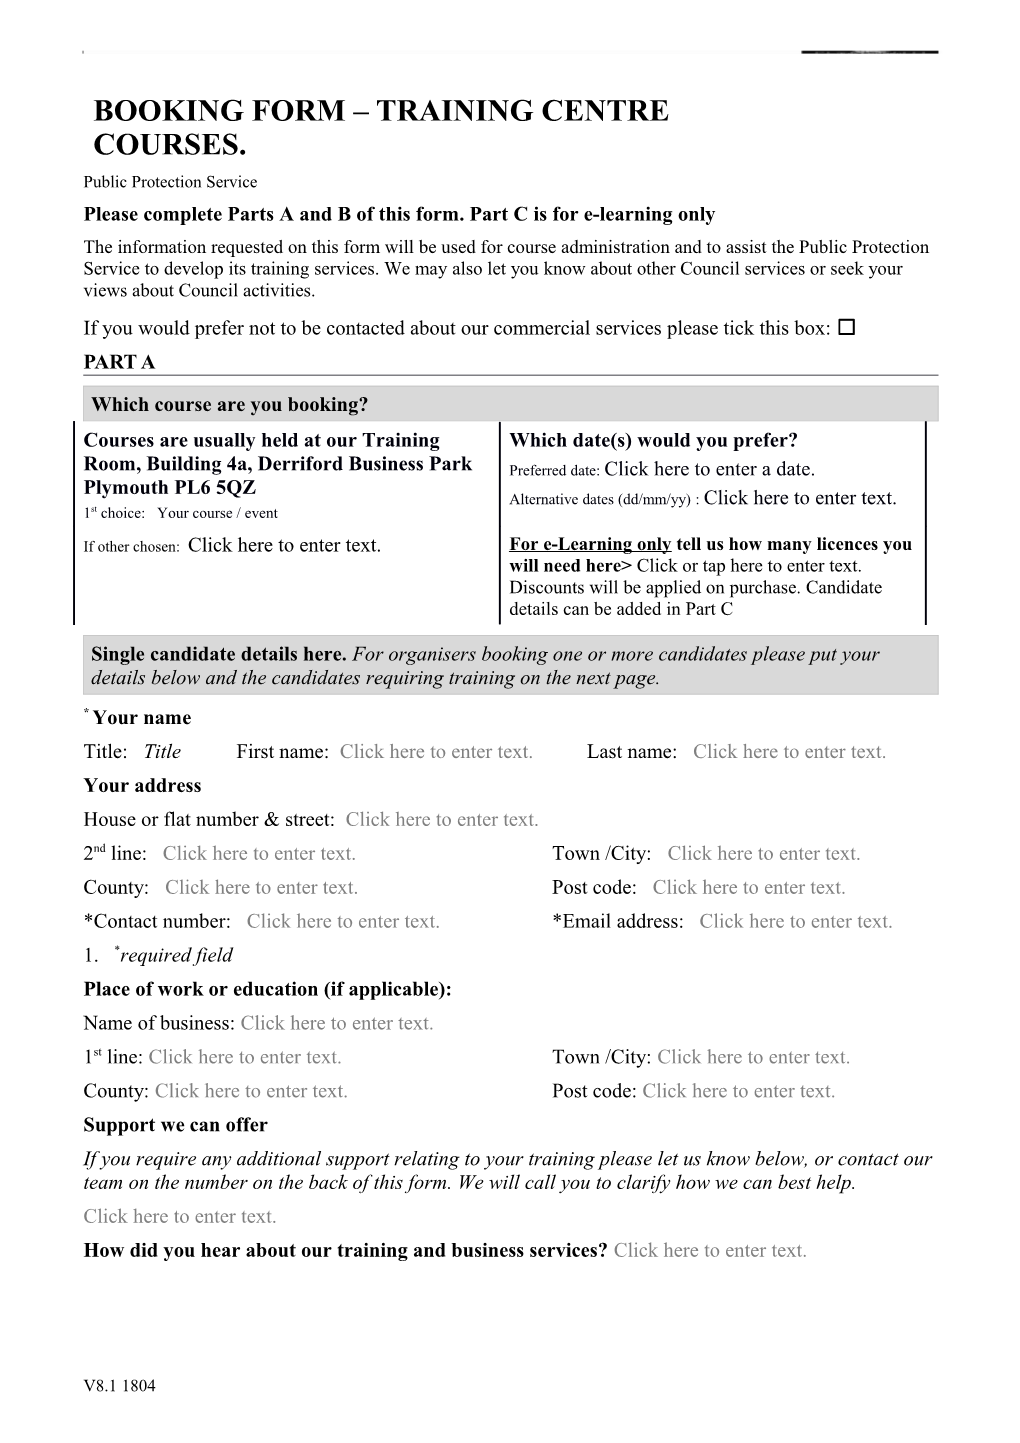 PPS Booking Form